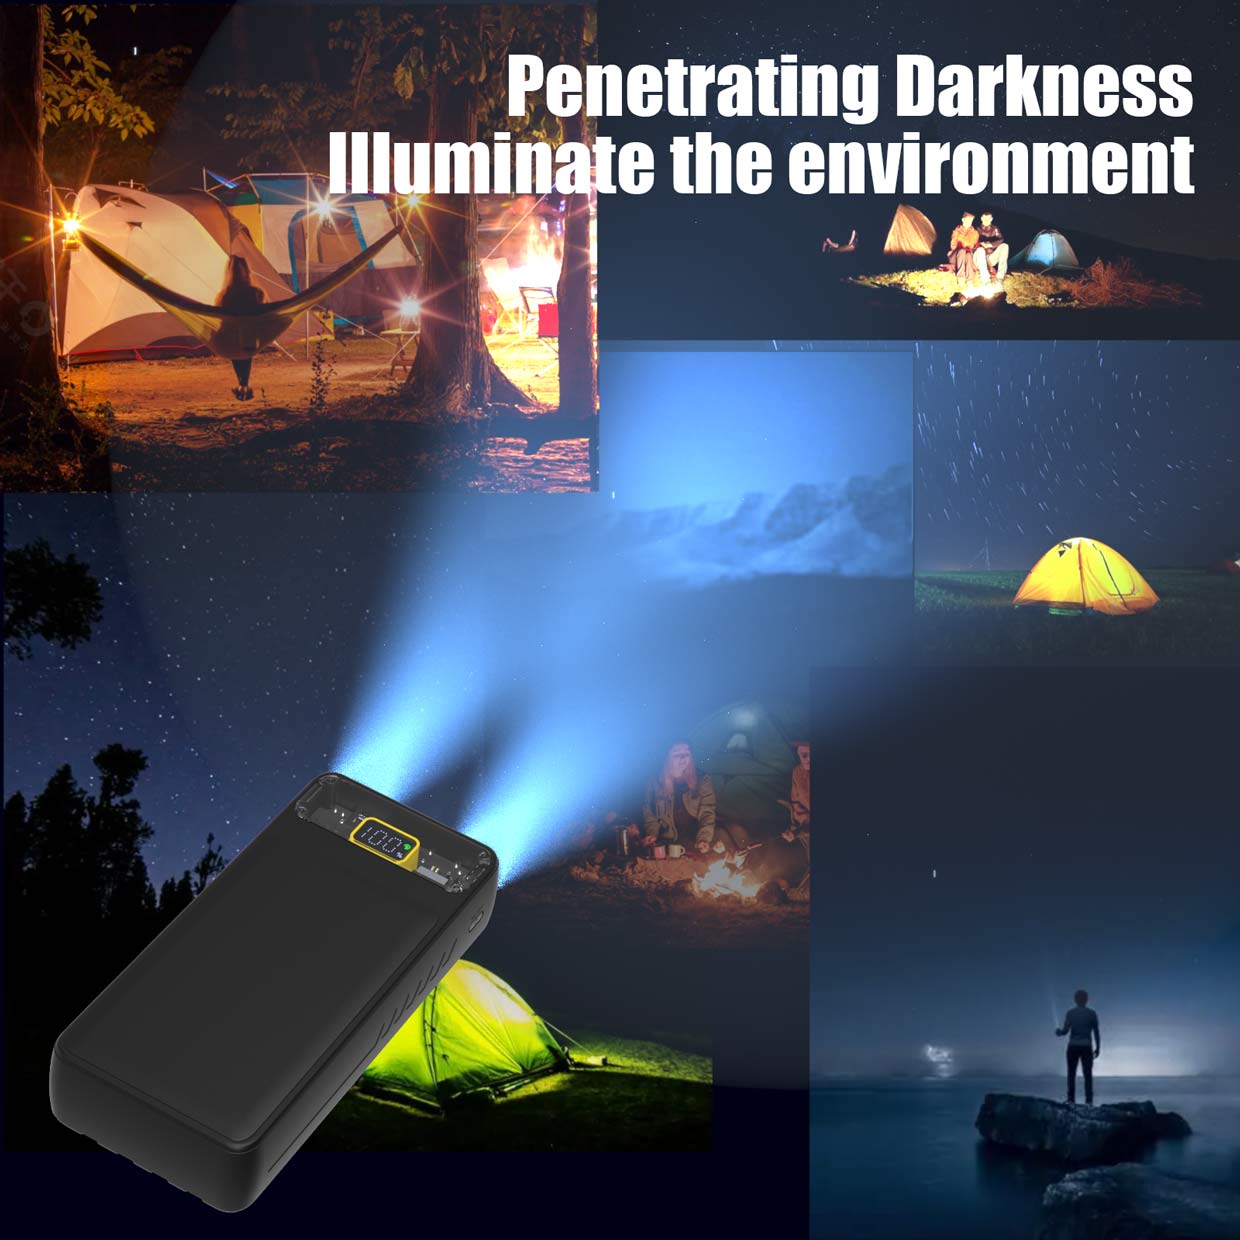 Flashlight 26800mAh, Power Bank, Quick Charge 22.5W & PD20W, Portable Charger, Built-in Cables, USB C External Battery Pack For smartphones tablets cameras and more.